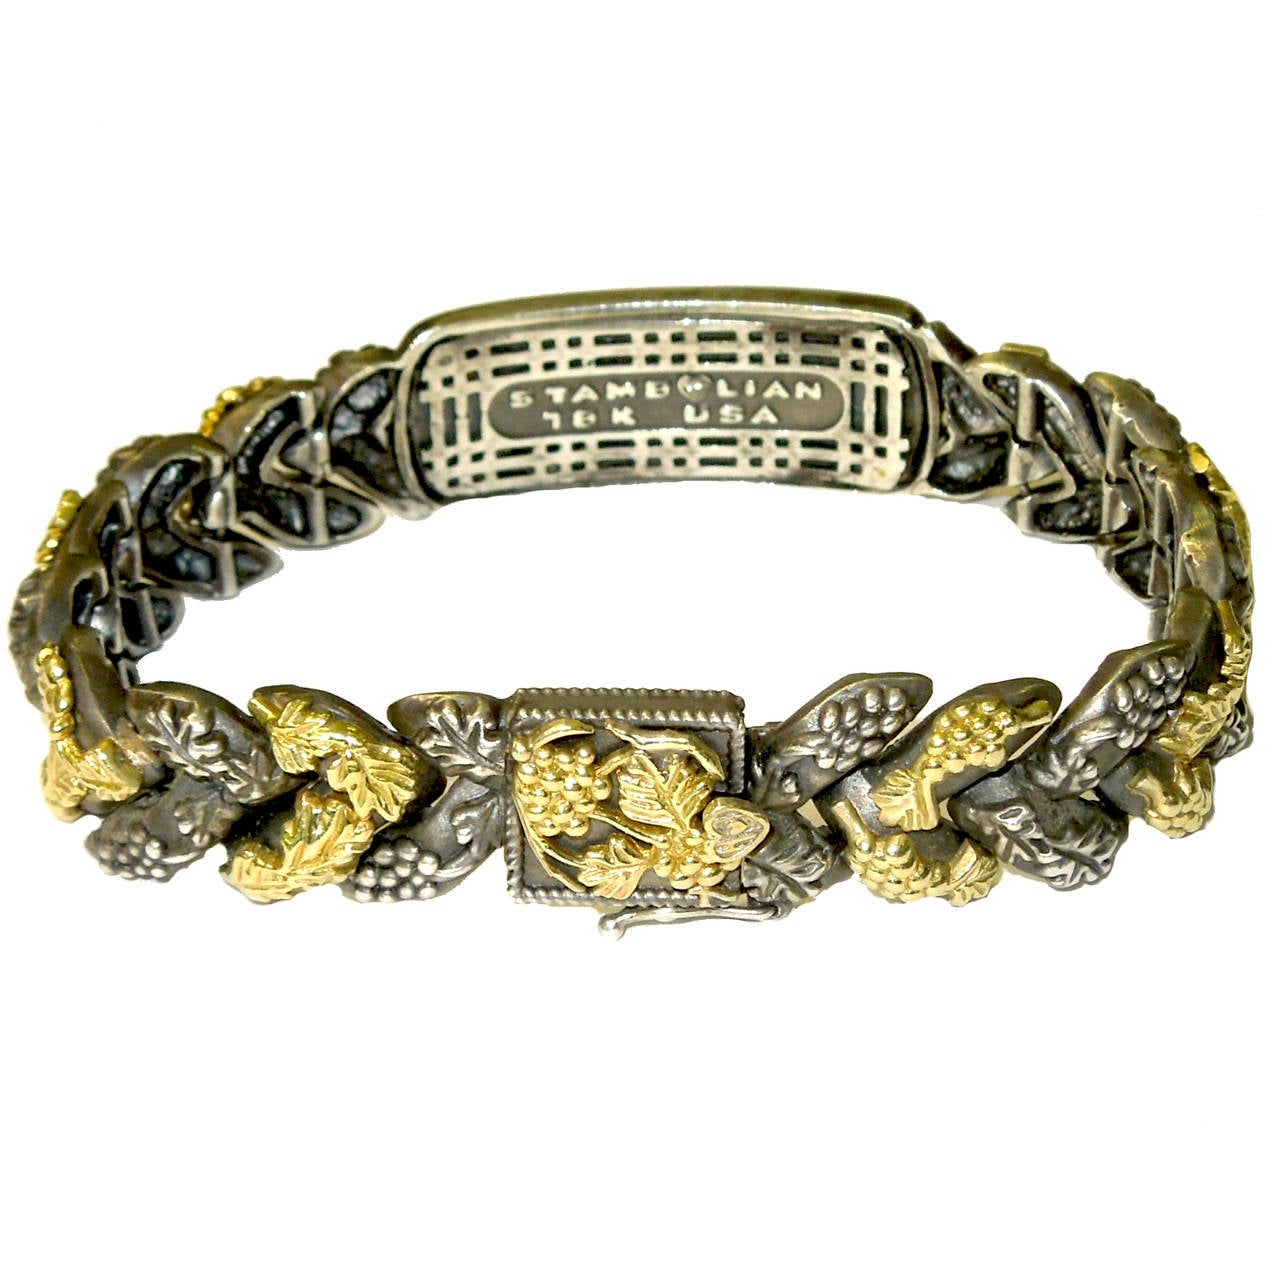 Stambolian Aged Silver 18K Gold Napa Valley Grapevine Mens Link Bracelet

Piece has grape vines throughout the piece in both Gold & Silver

Aged Silver bar with 18K Gold Grape Vines covers the entire center of the bracelet

Gold and silver